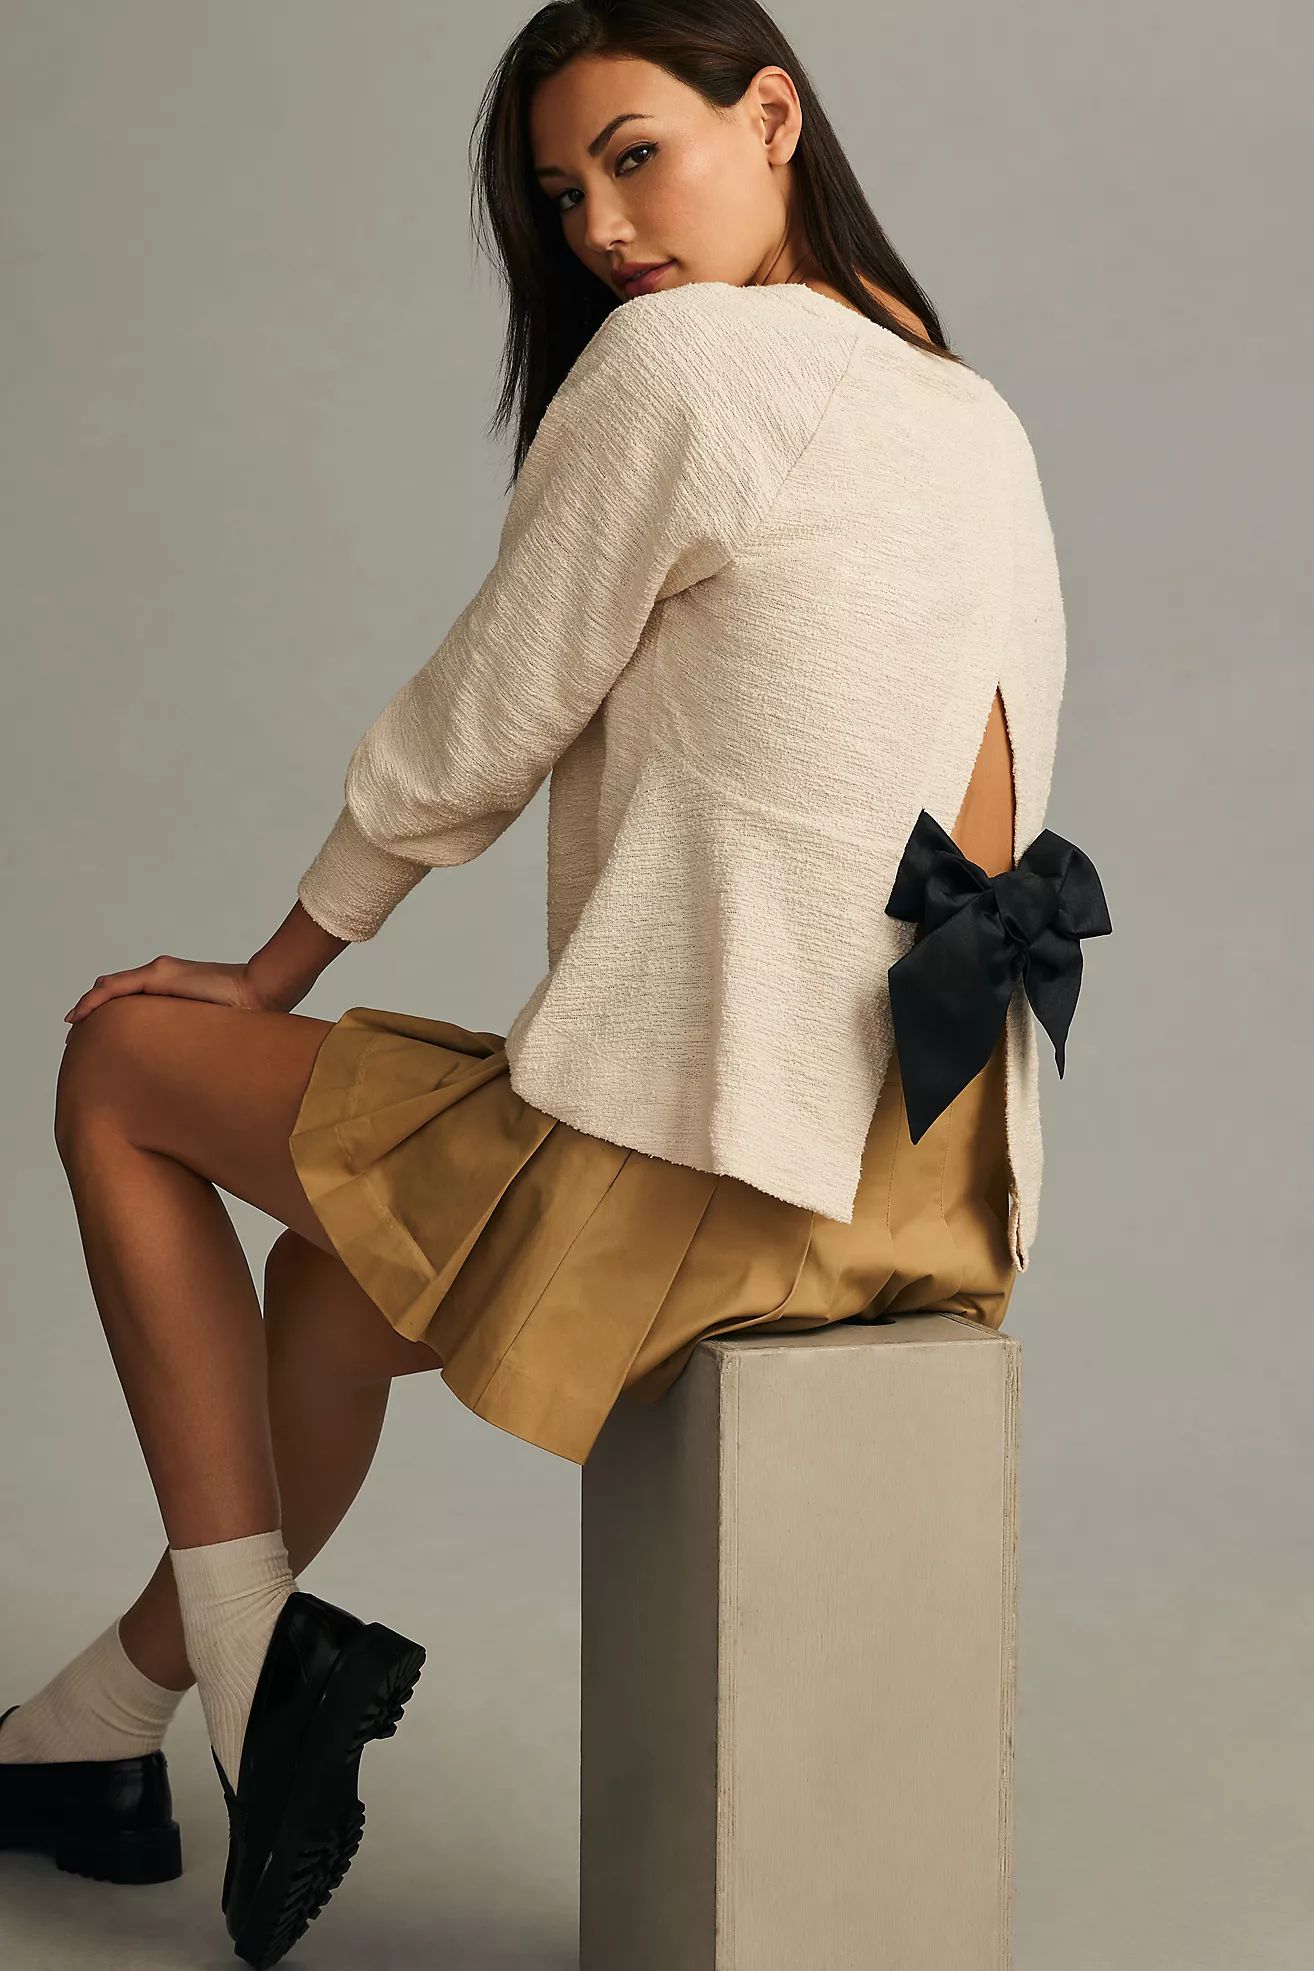 By Anthropologie Back-Bow Sweatshirt | Anthropologie (US)